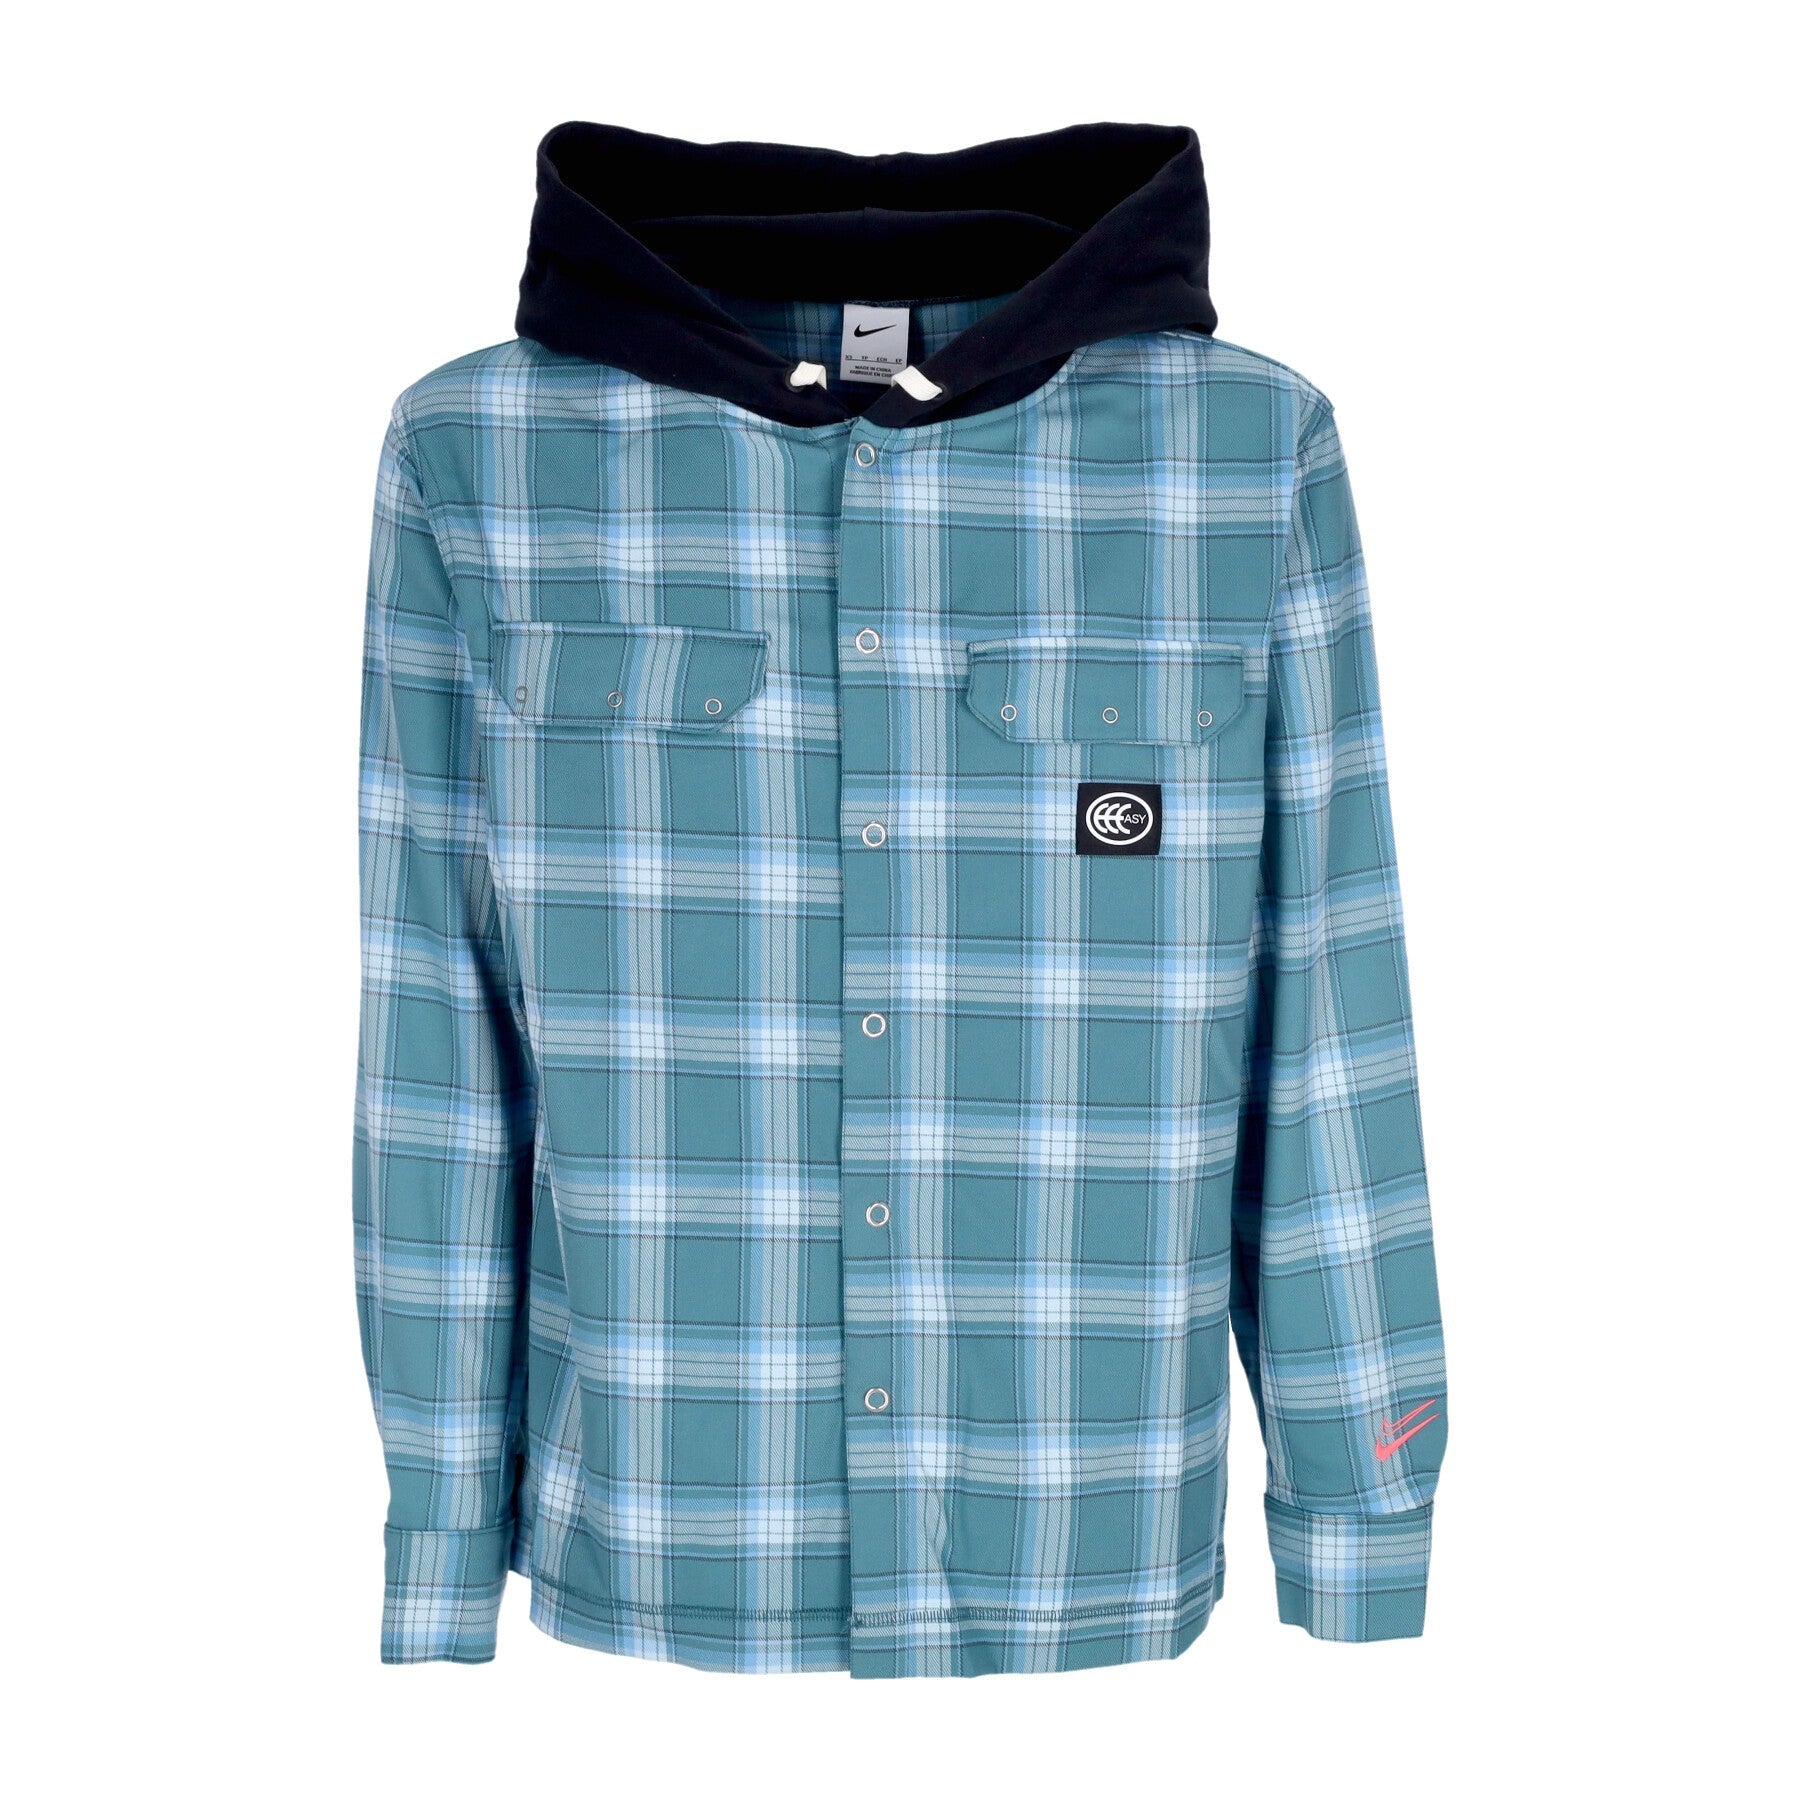 Nike Nba, Camicia Manica Lunga Cappuccio Uomo Nba Kevin Durant Flannel Hoodie, Mineral Teal/black/pale Ivory/hot Punch